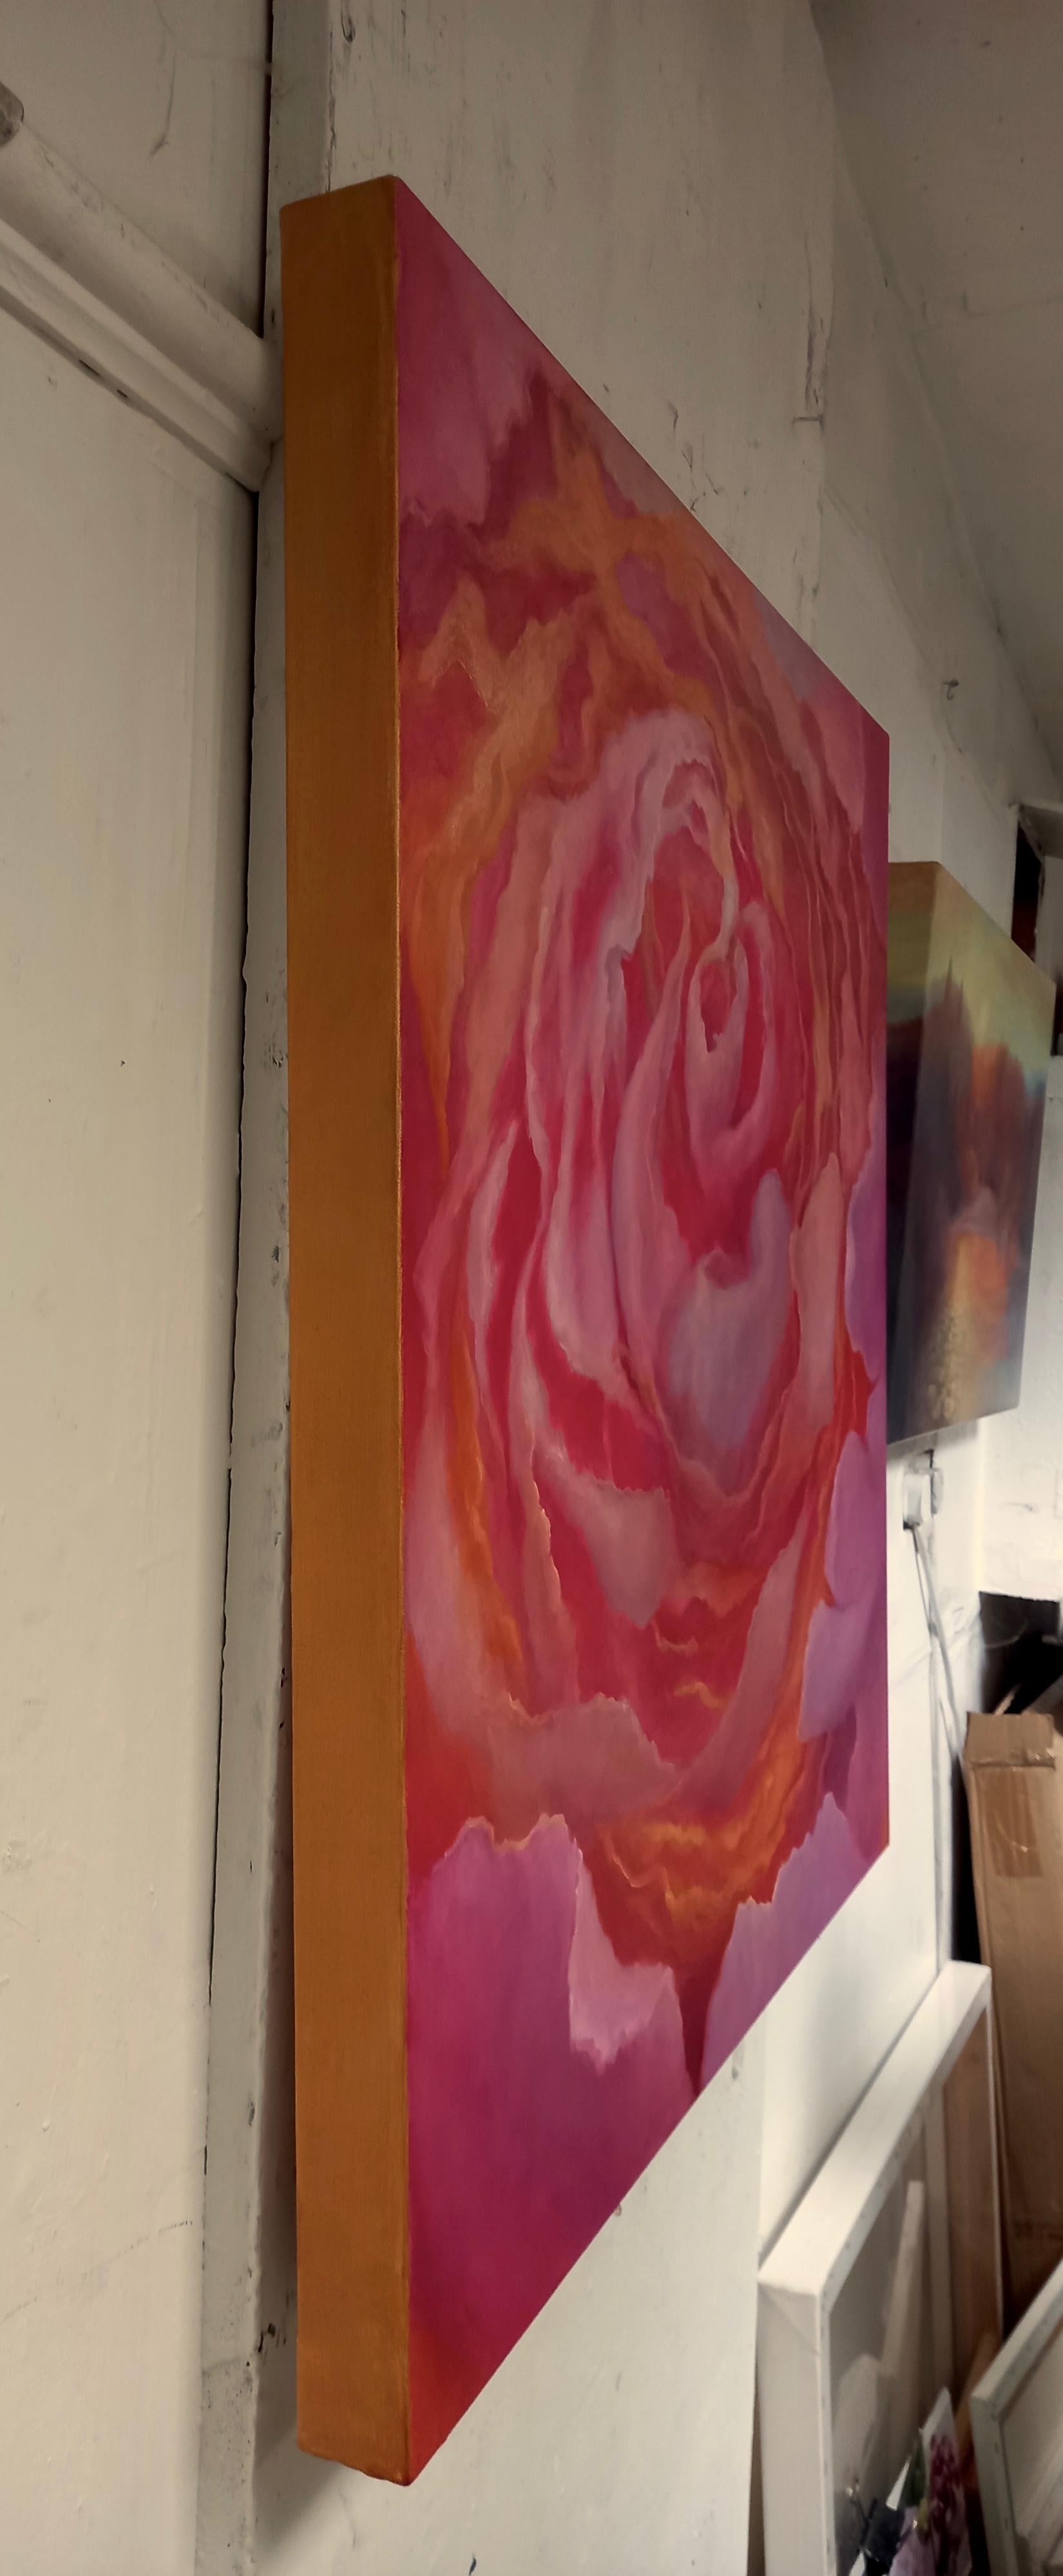 Rose Dorè, Contemporary Signed Original Pink Rose Flower Oil Painting on Canvas 6